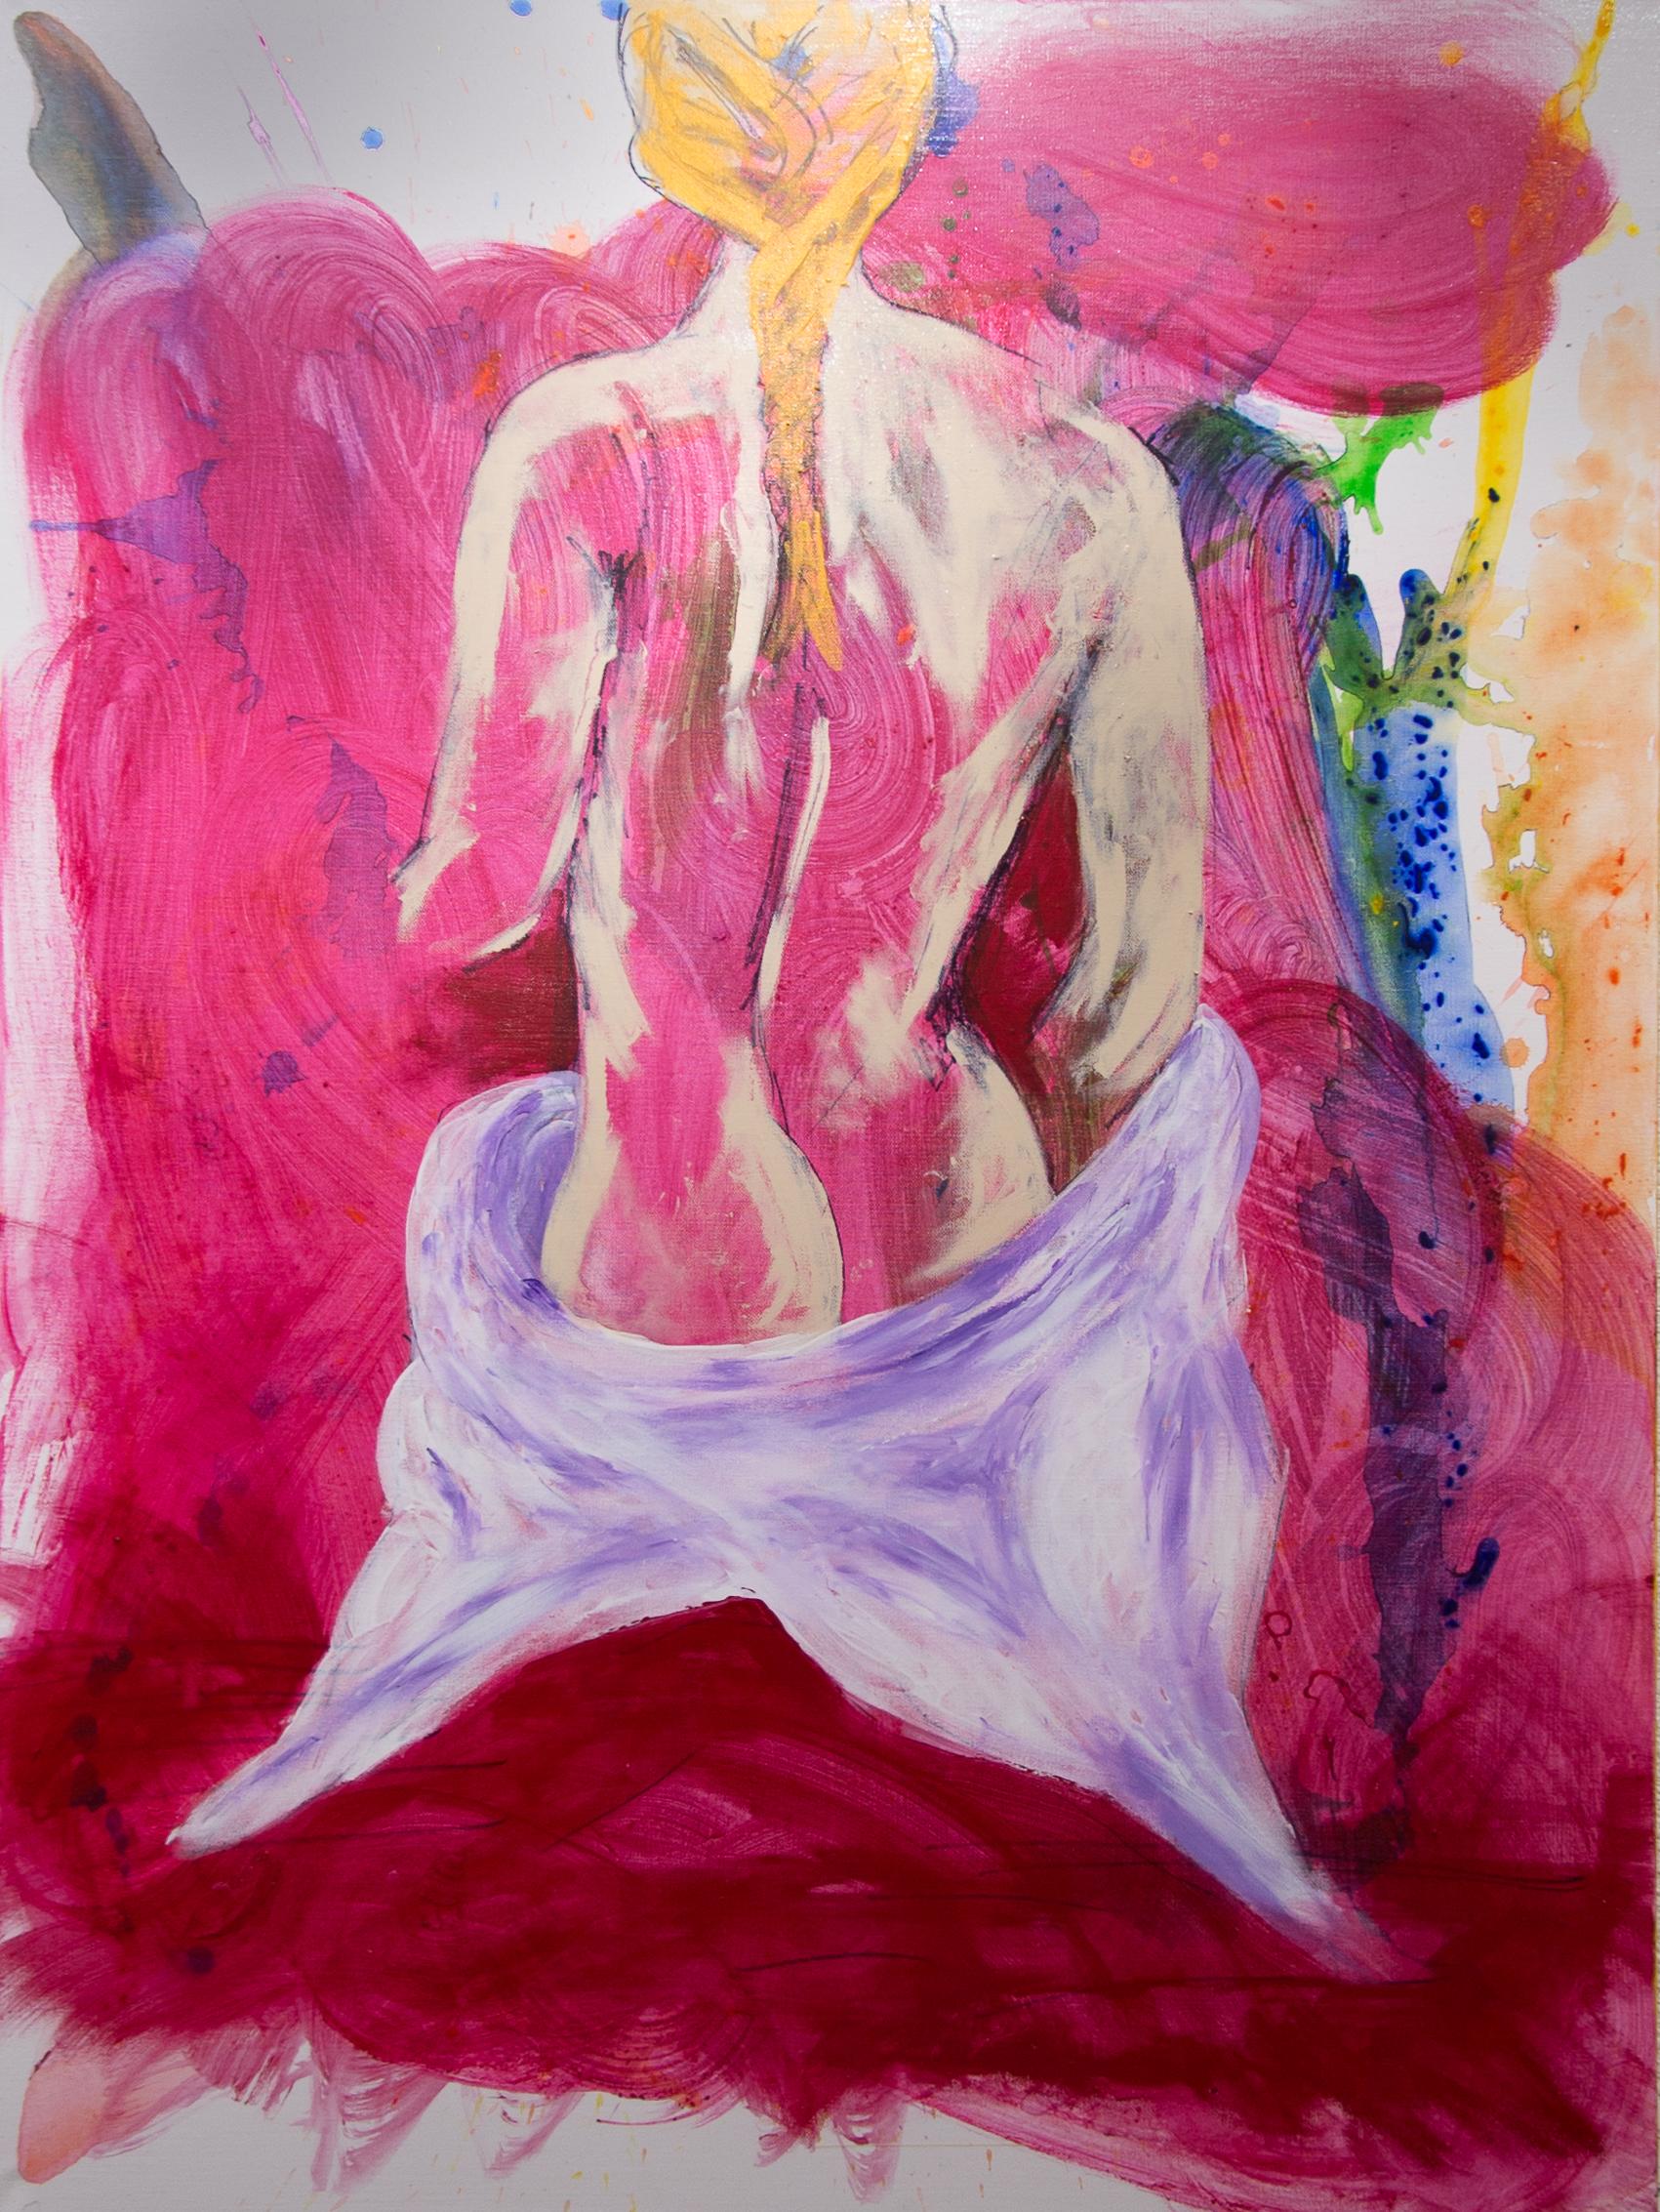 Gary Visconti  Figurative Painting - WOMEN OF THE NIGHT pink aclylic on canvas